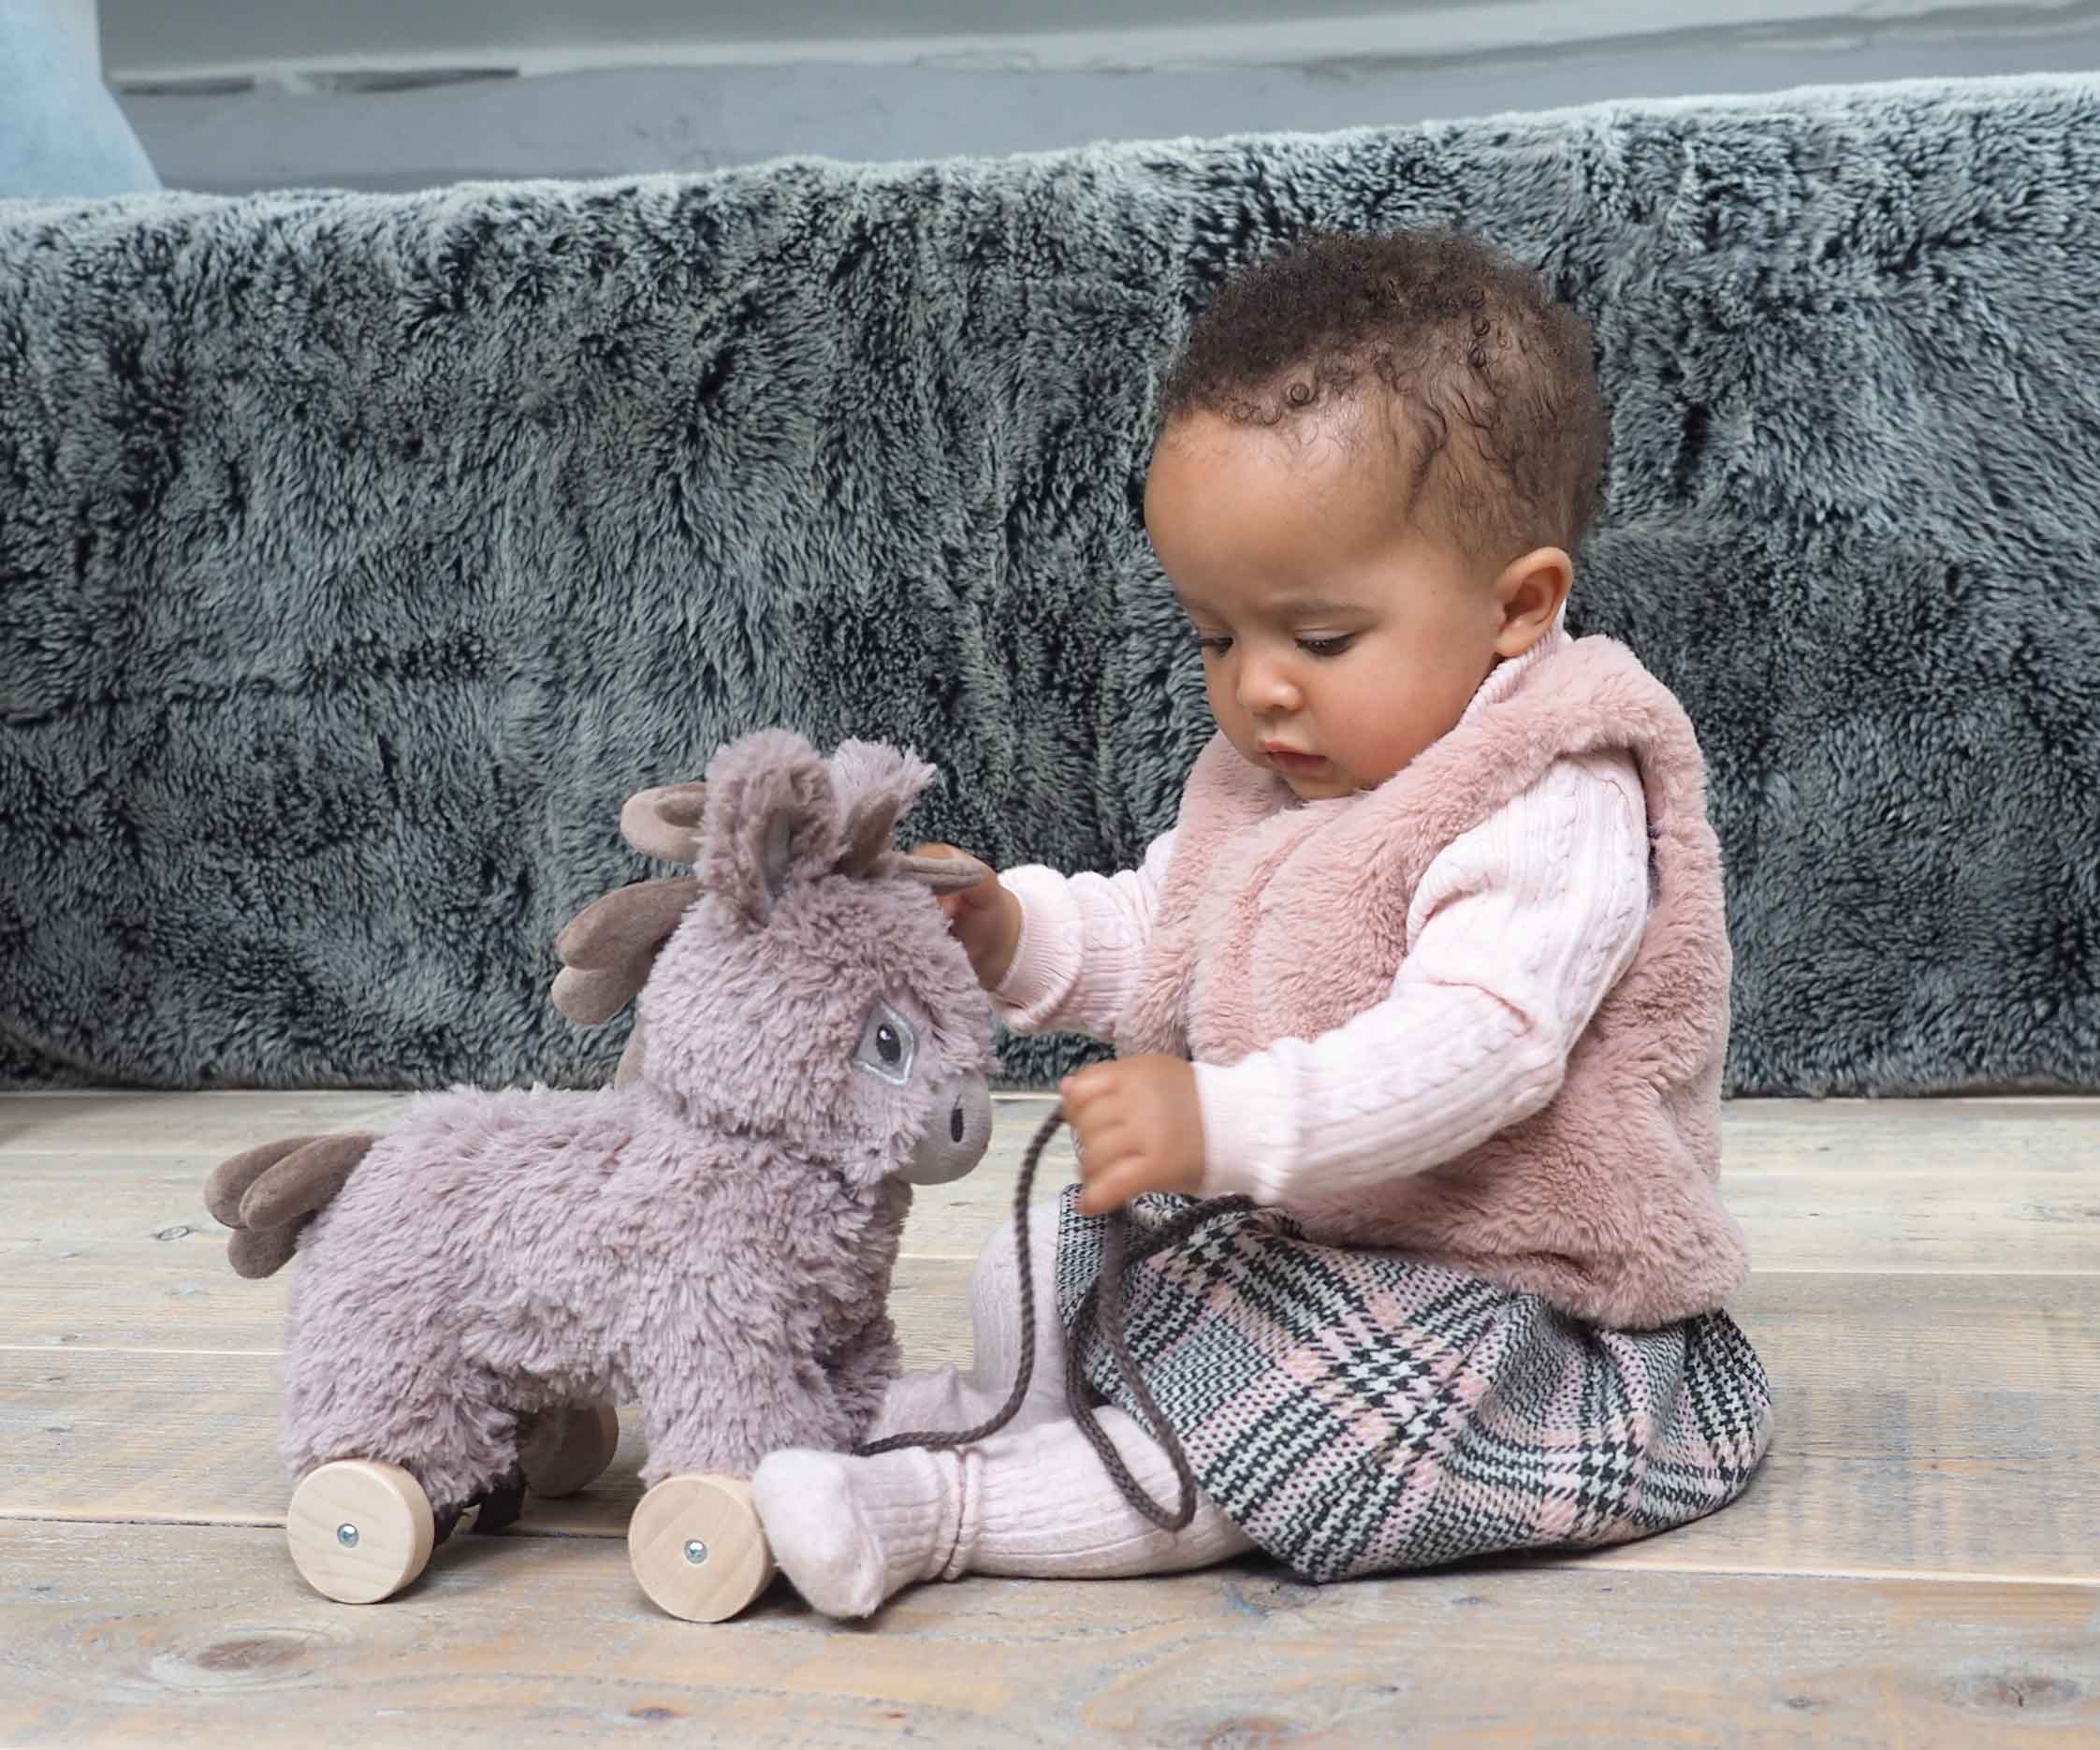 Little Bird Told Me Norbert Donkey Pull Along Toy - For Your Little One